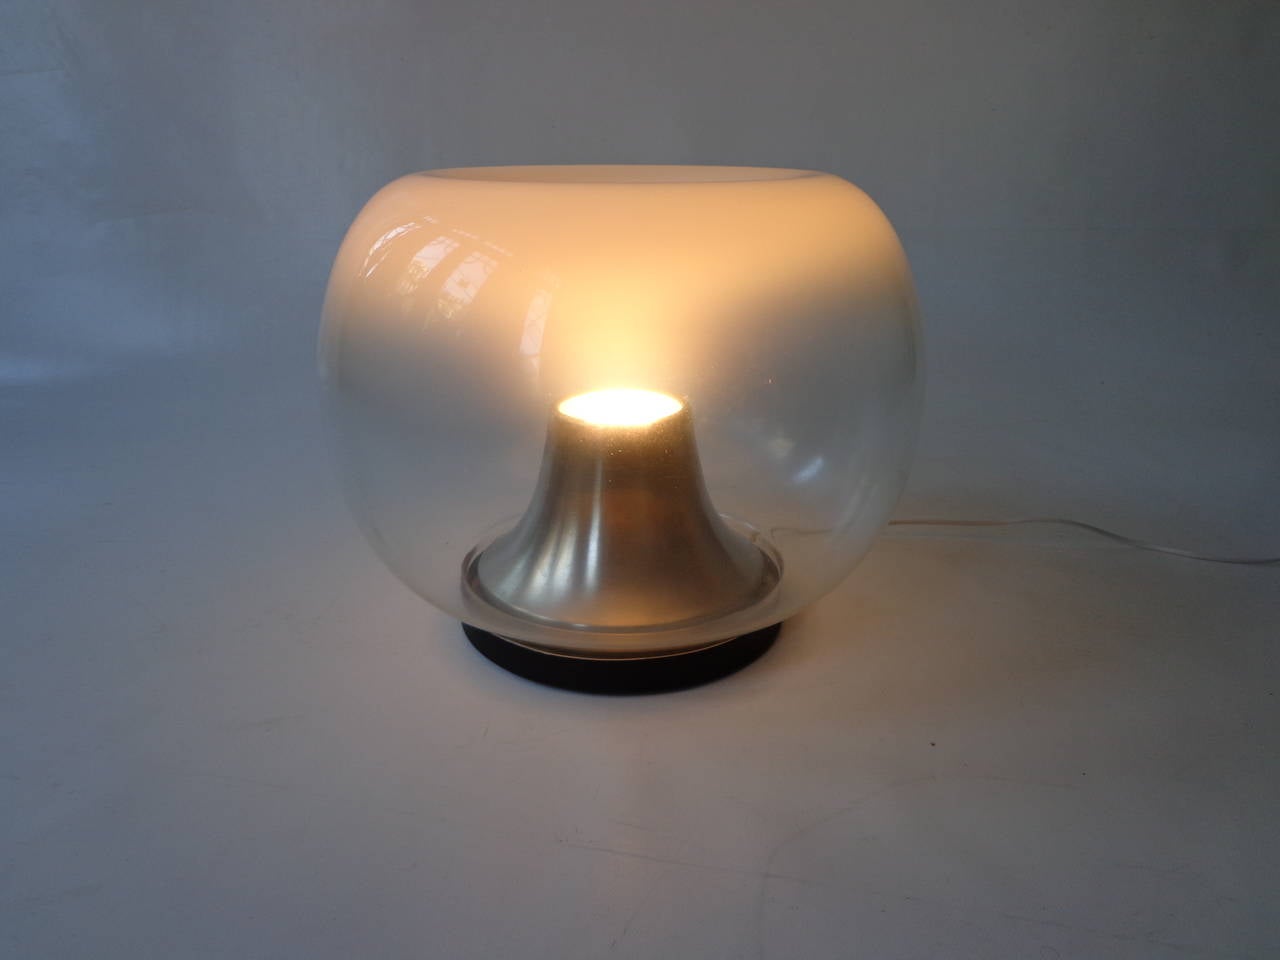 The glass globe has a white glow in the top which gives a beautiful warm light.

Shipping services:
Ask for our competitive shipping quotes.